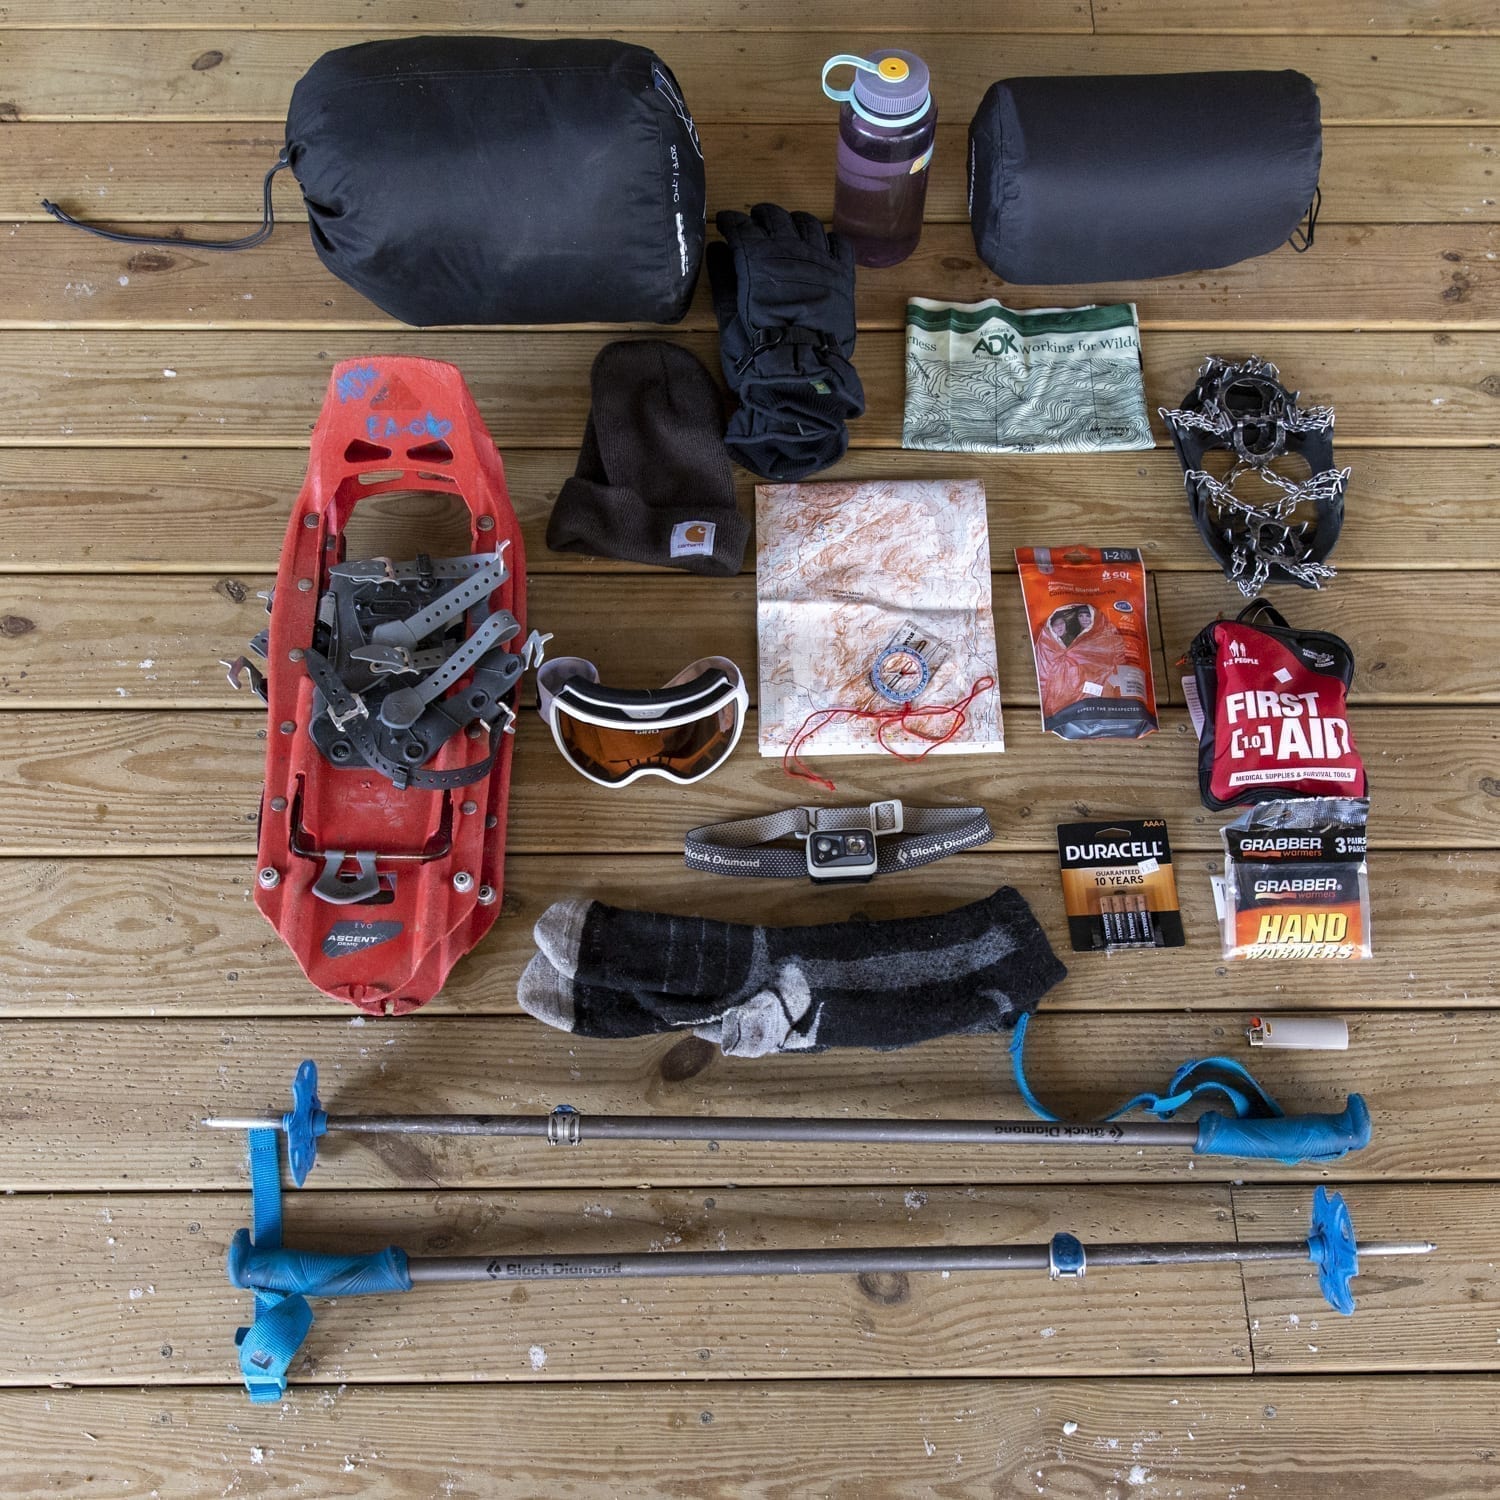 Essential gear for recreating in the winter